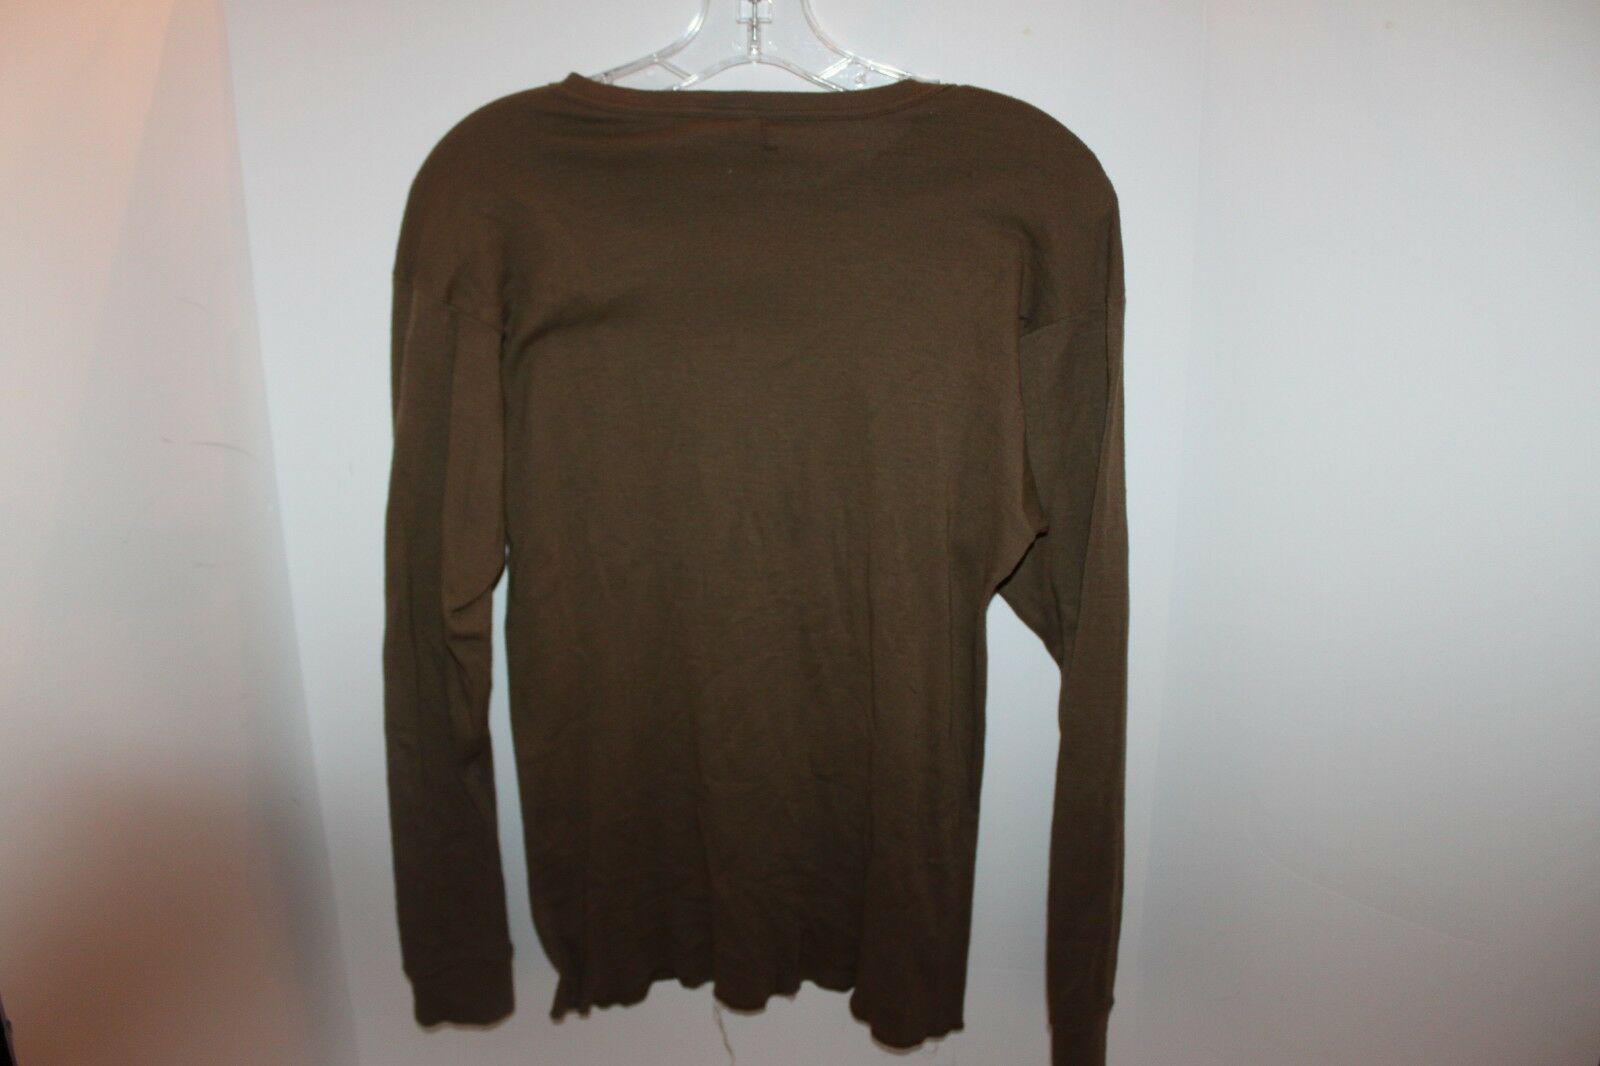 US Military Medalist Men's Long Sleeve Shirt Size Medium Brown Thermals Warm Top